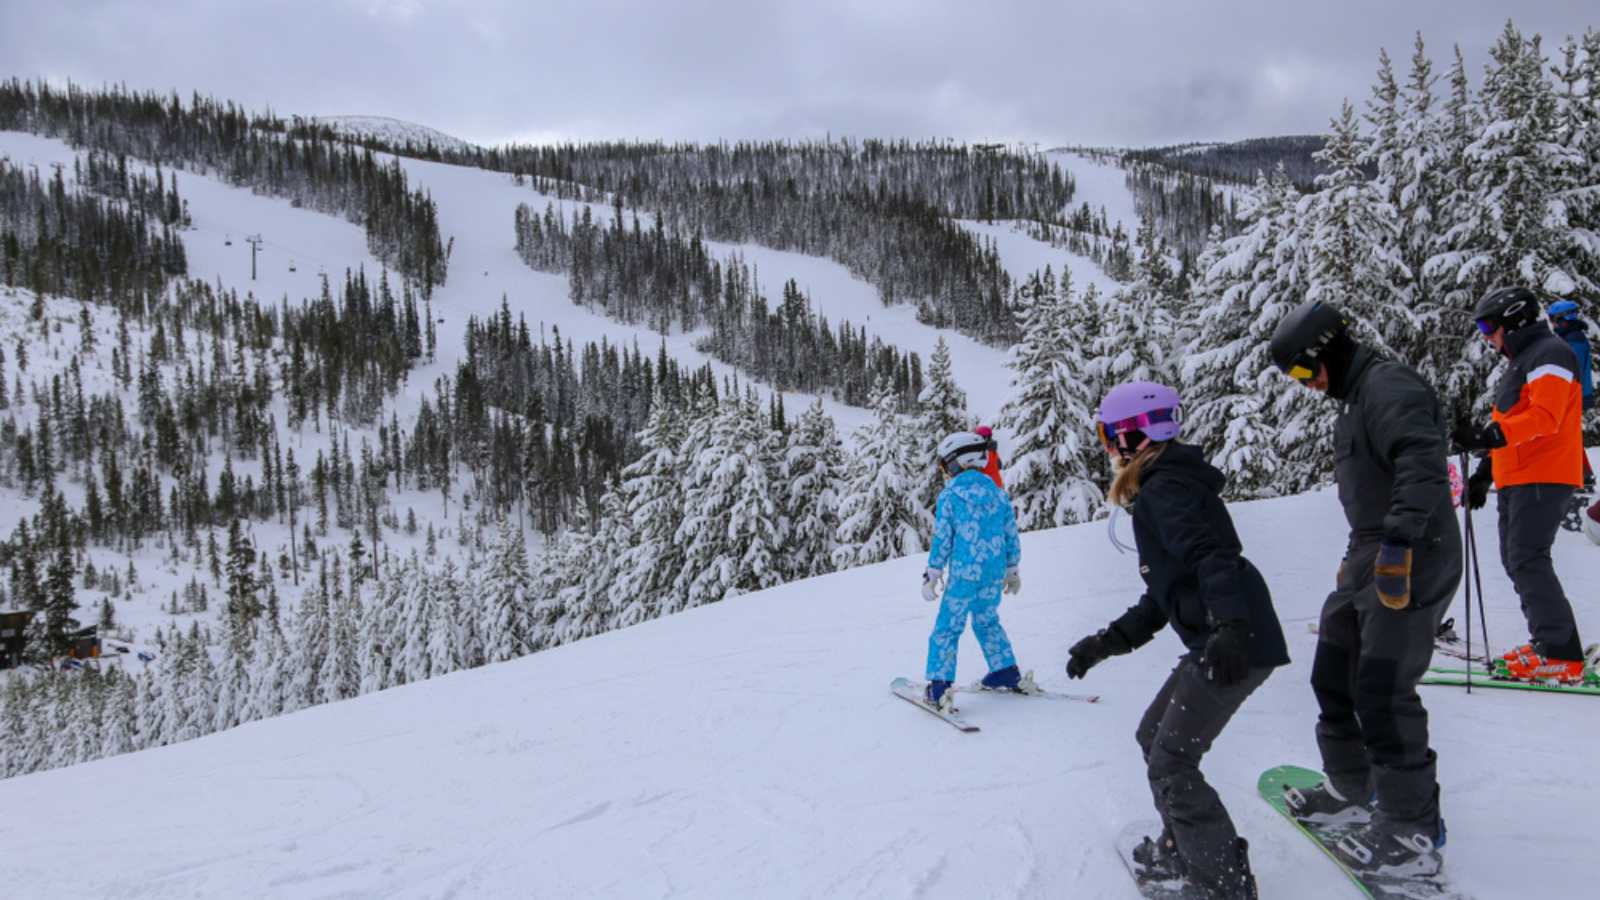  People skiing downhill at Winter Park Resort in Colorado